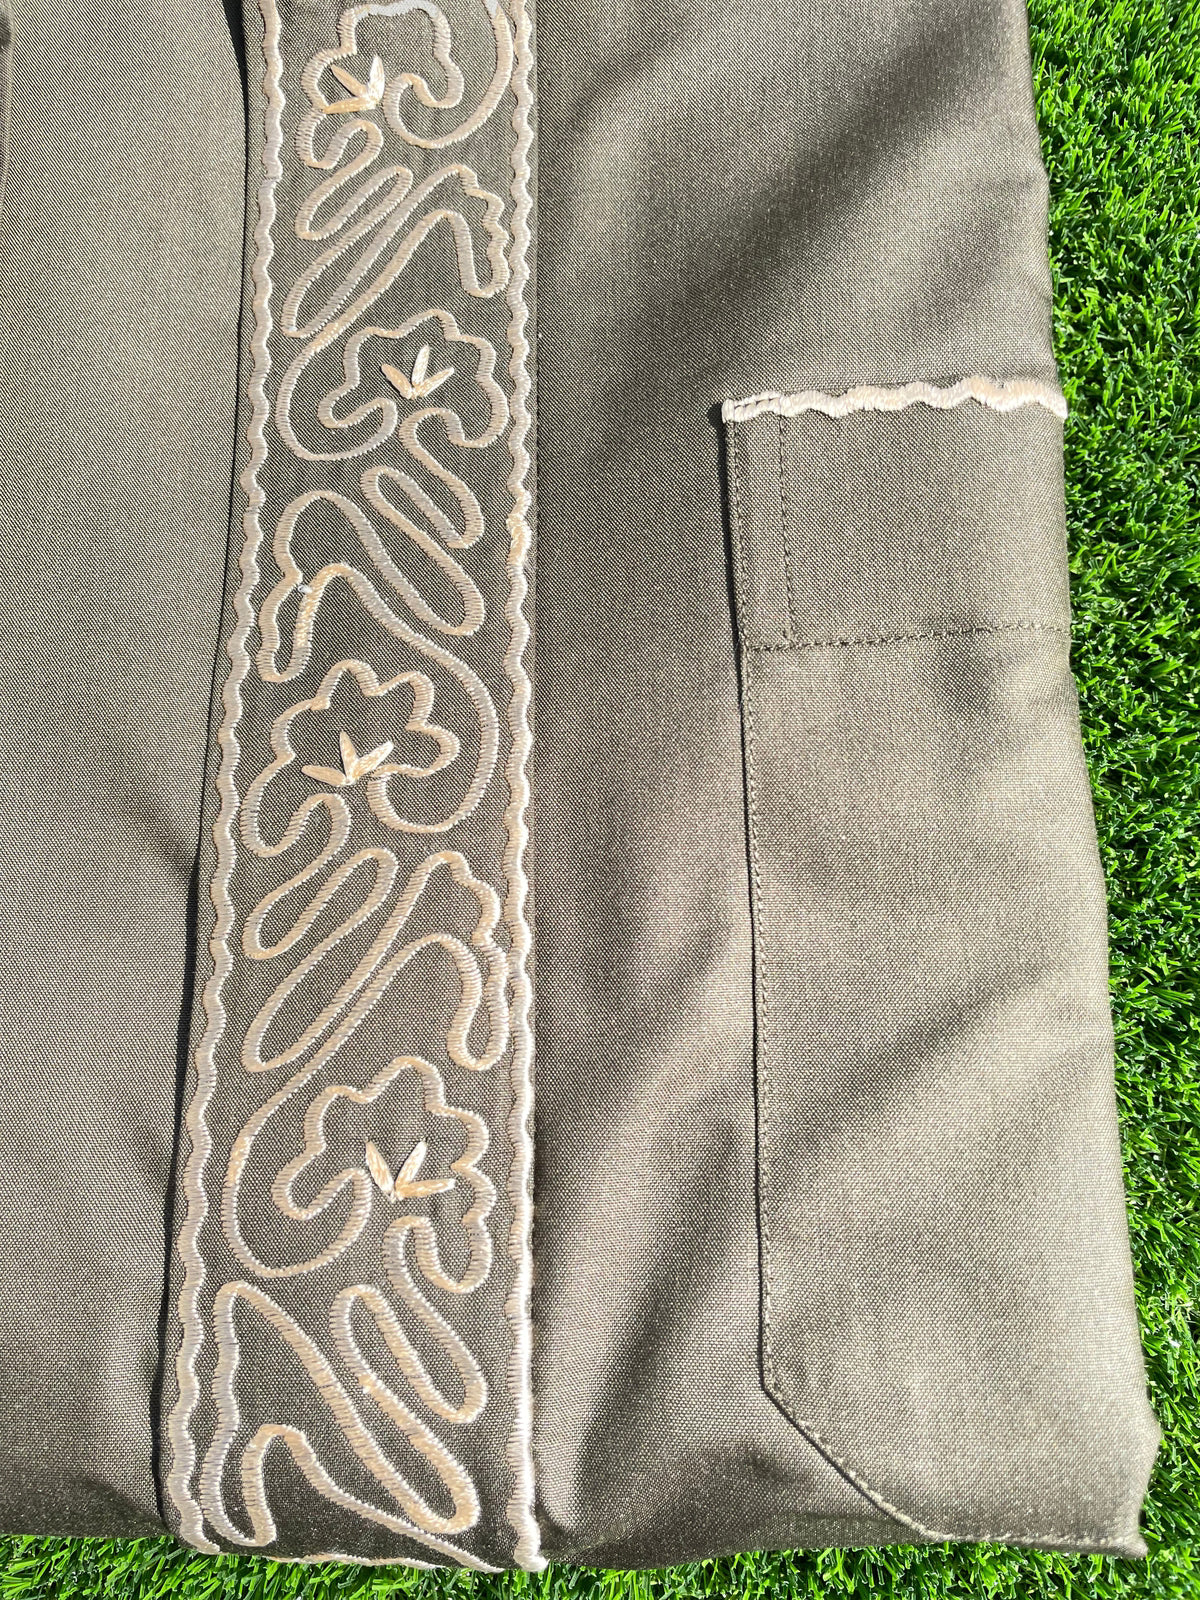 Mens Army Green Kuwaiti Thobe with Gold Embroidery